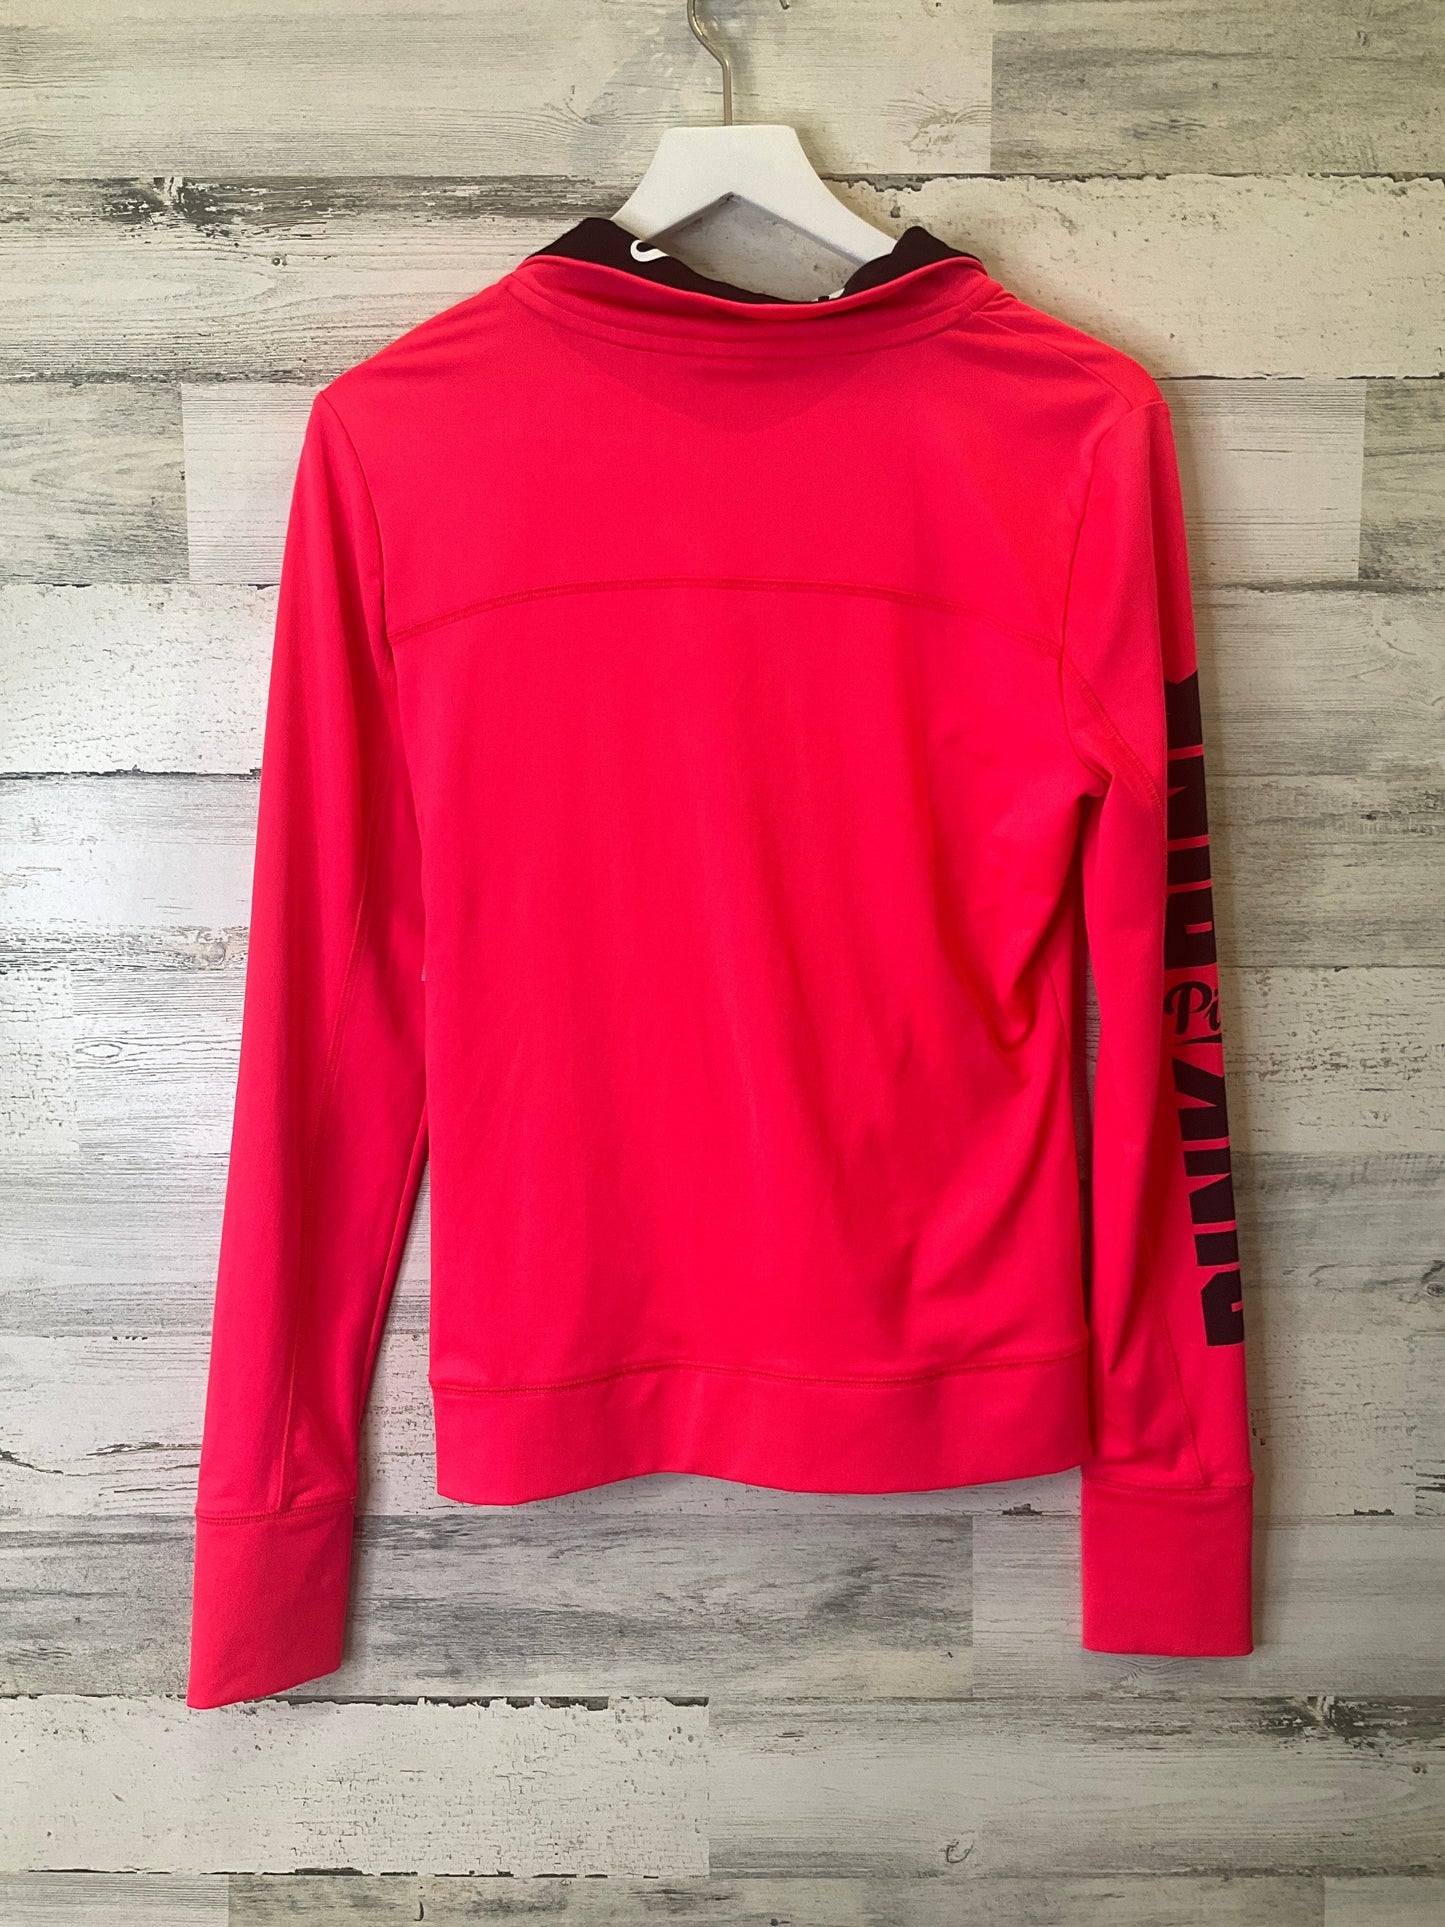 Pink Athletic Top Long Sleeve Collar Pink, Size Xl